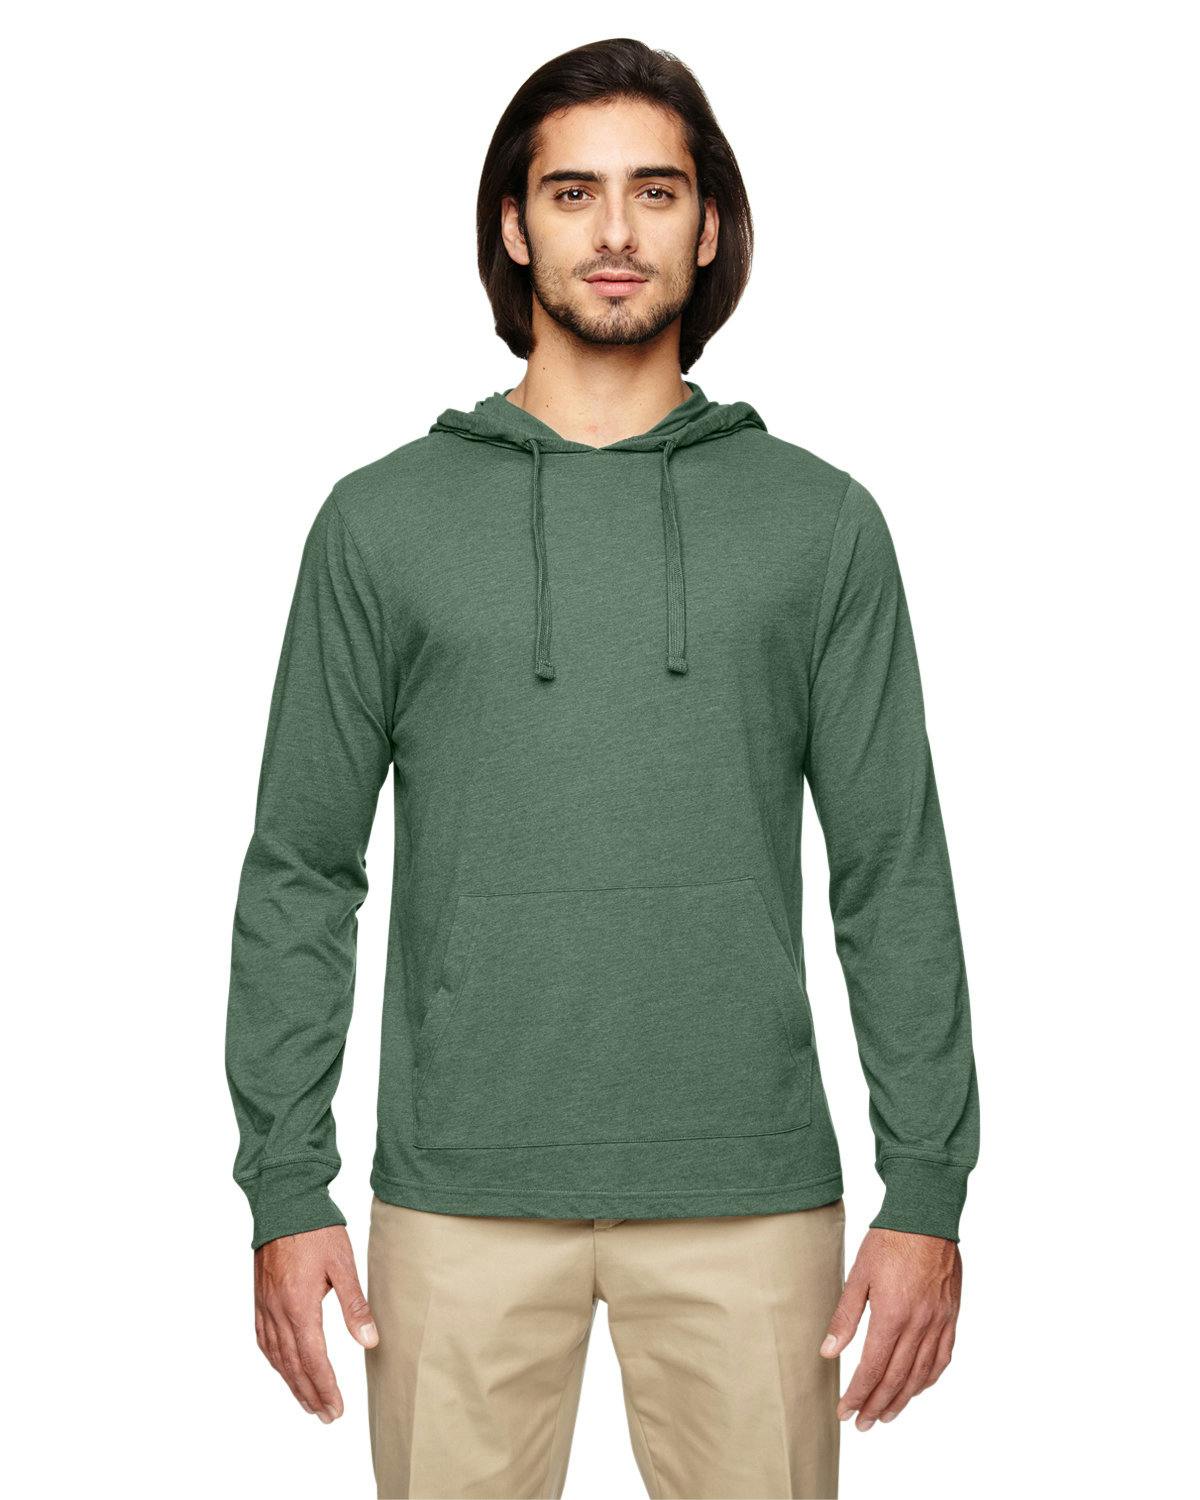 Image for Unisex Eco Blend Long-Sleeve Pullover Hooded T-Shirt